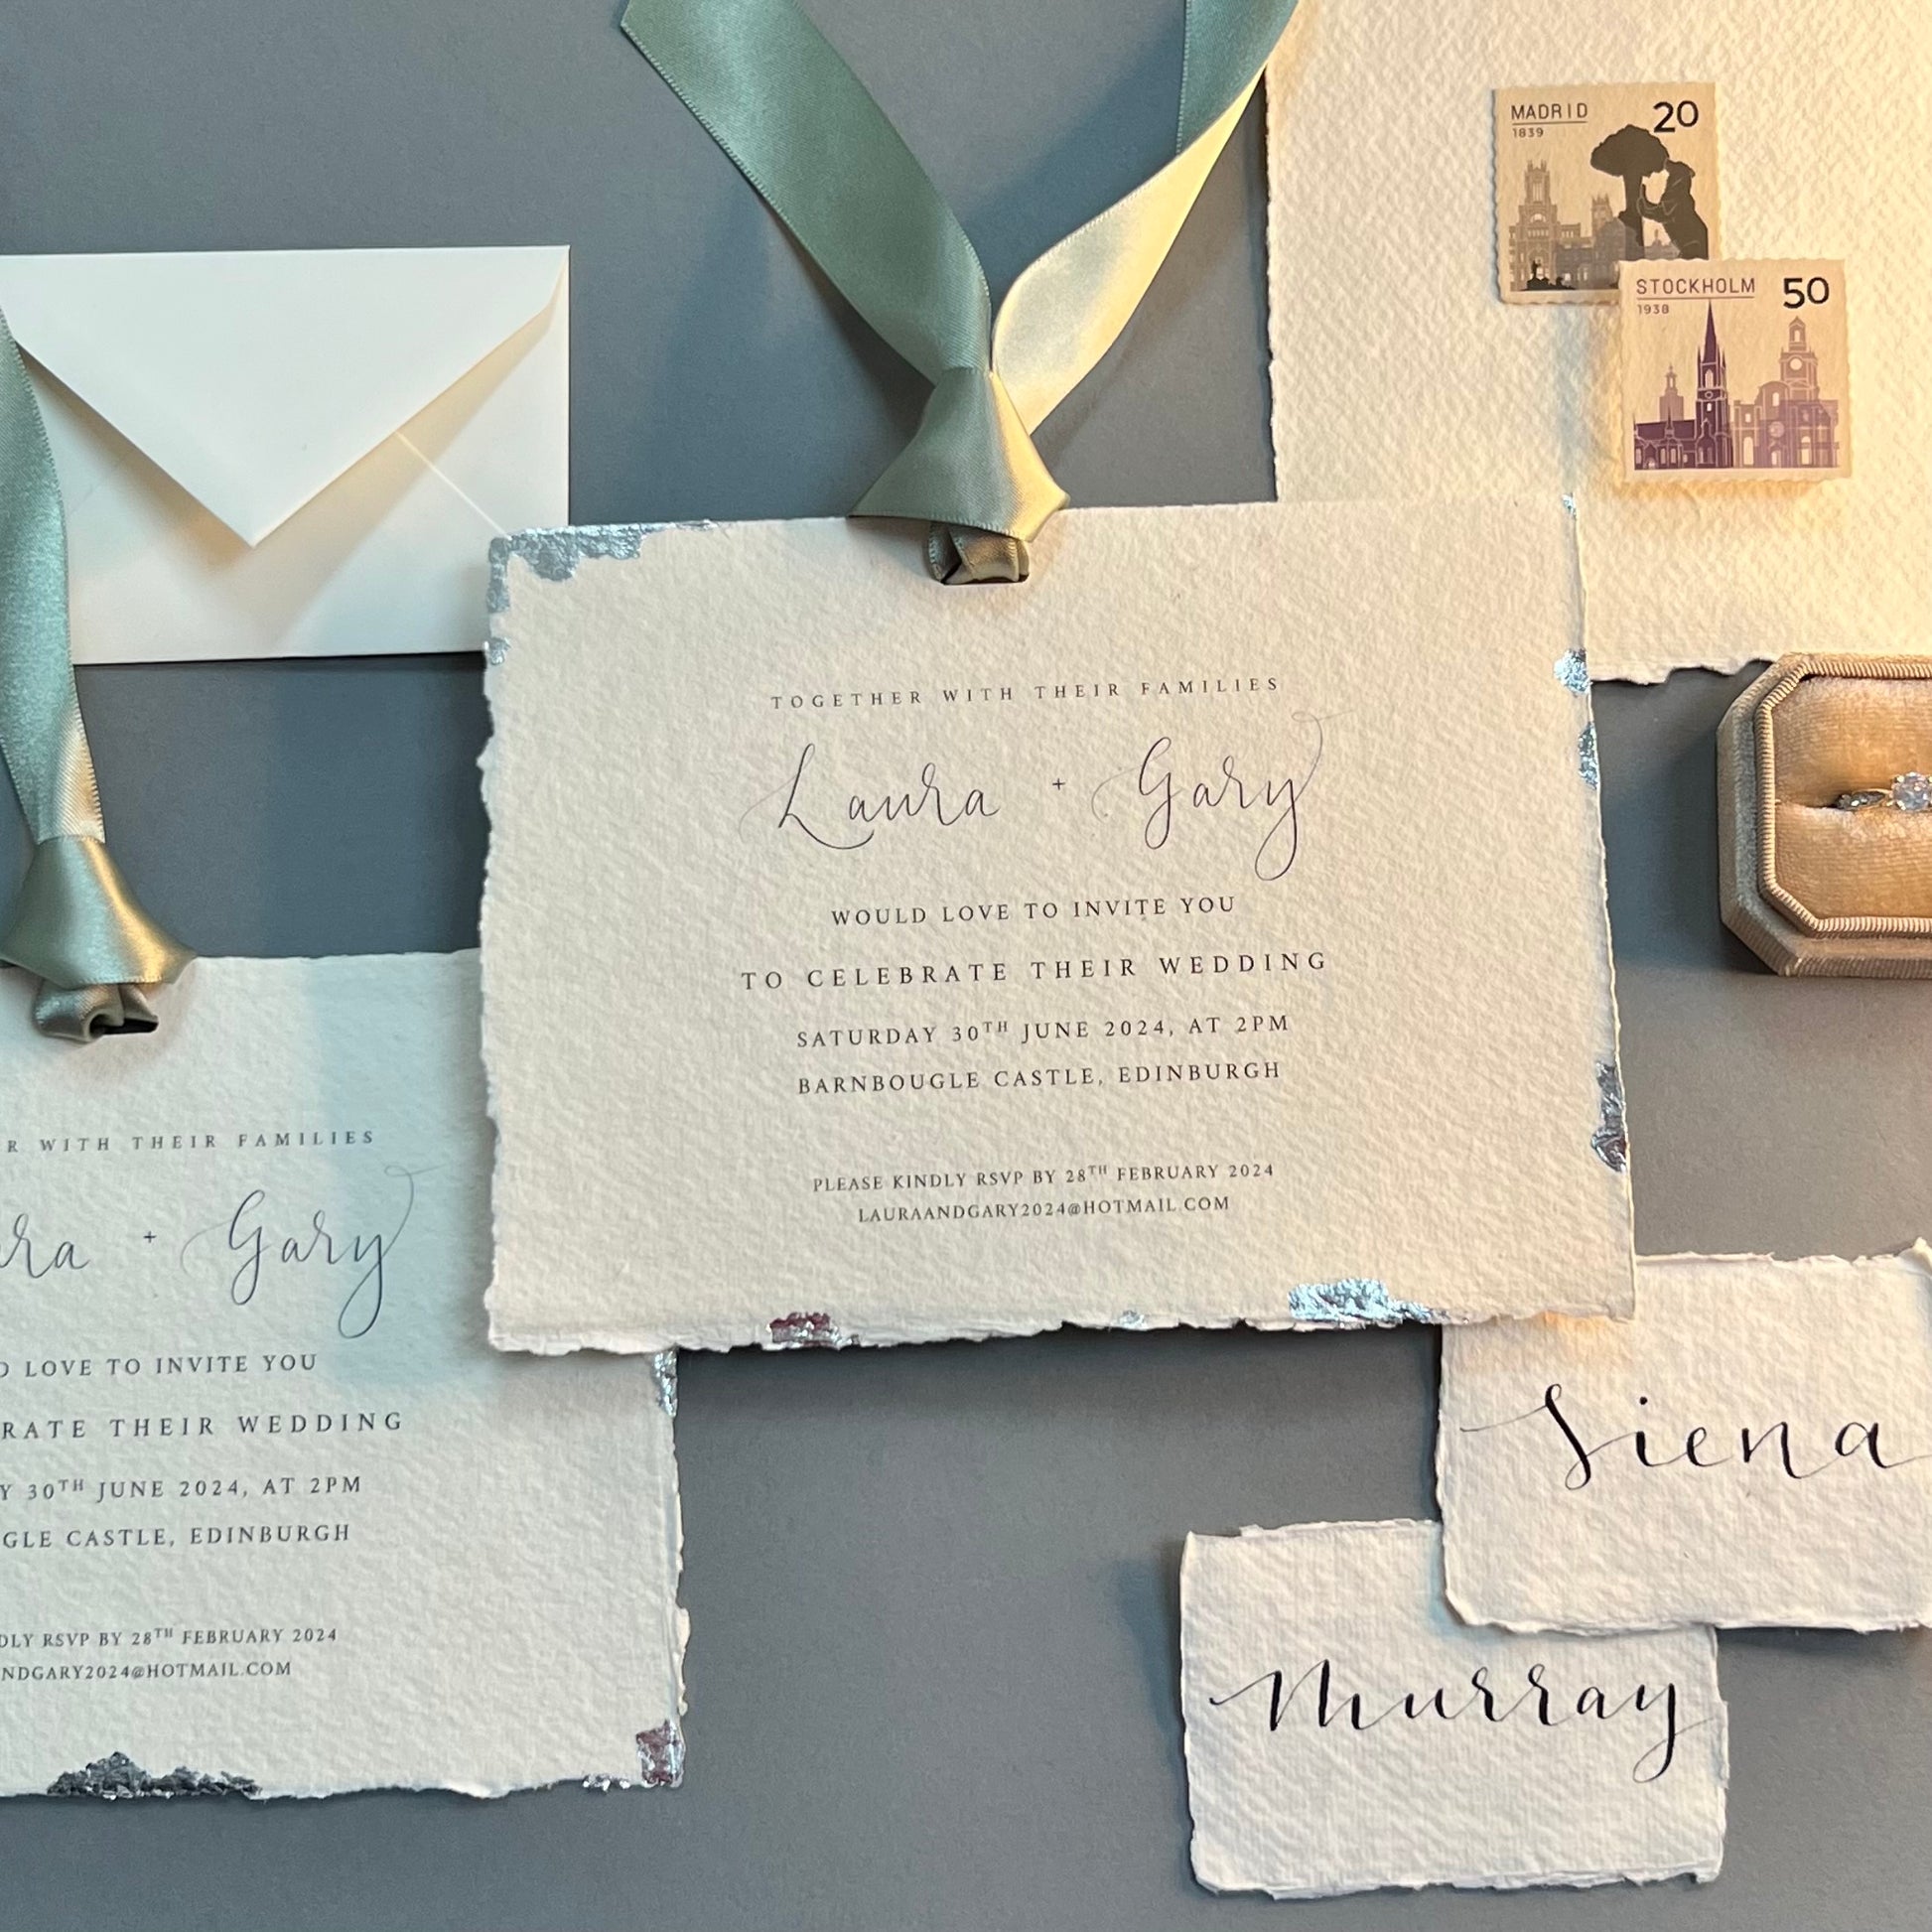 Collection of cotton paper invites, envelopes, stamps and wedding ring